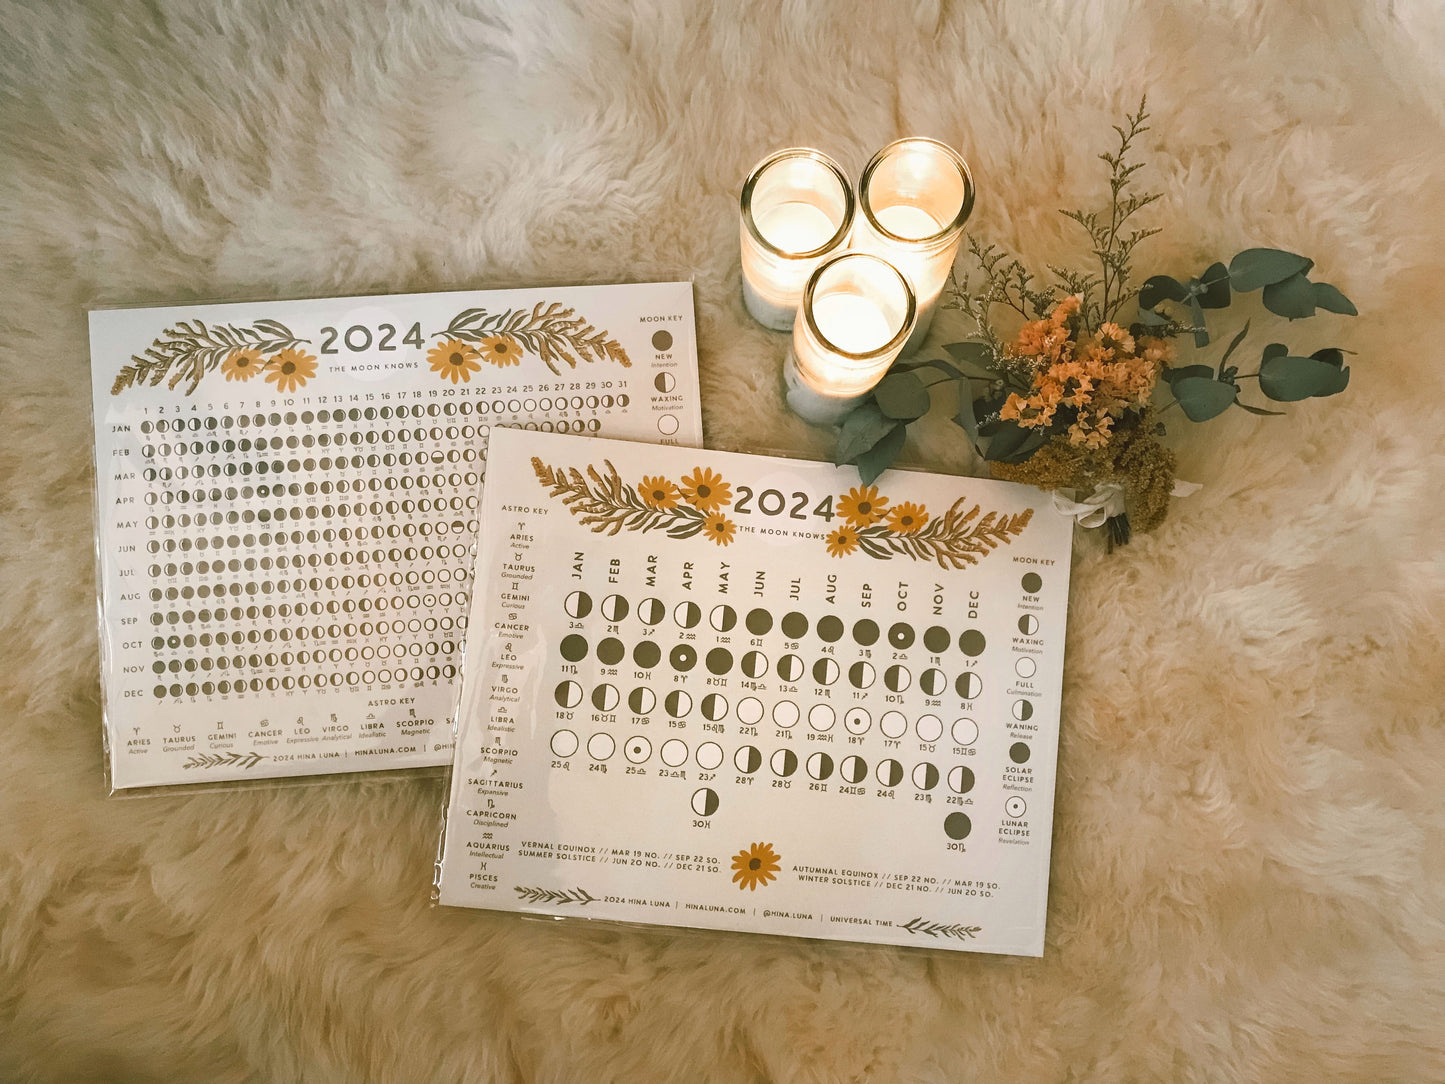 Hina Luna's 2024 moon calendar designs laying on top of a white sheepskin rug surrounded by dried flowers and candles